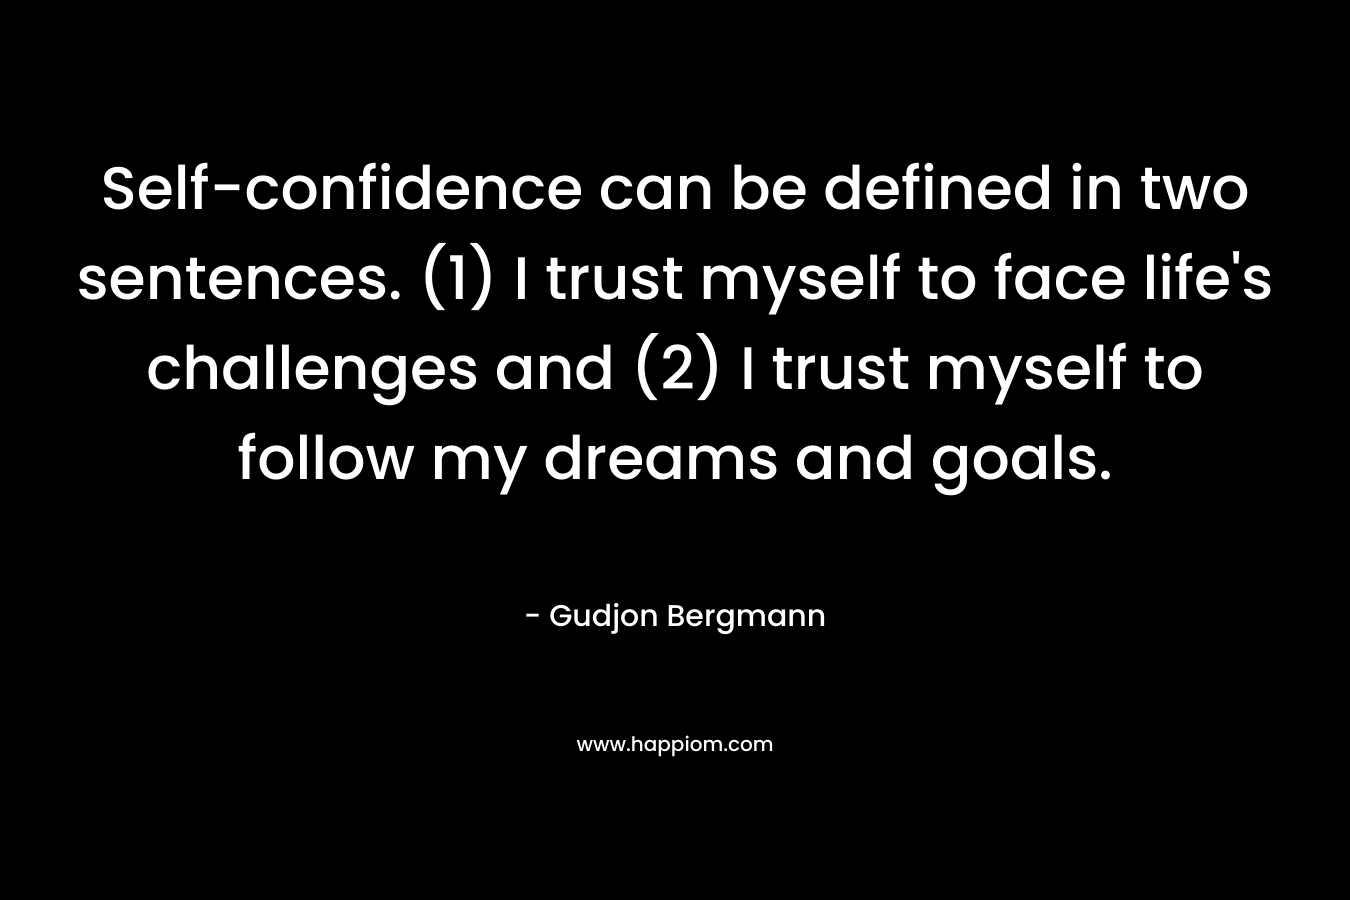 Self-confidence can be defined in two sentences. (1) I trust myself to face life’s challenges and (2) I trust myself to follow my dreams and goals. – Gudjon Bergmann